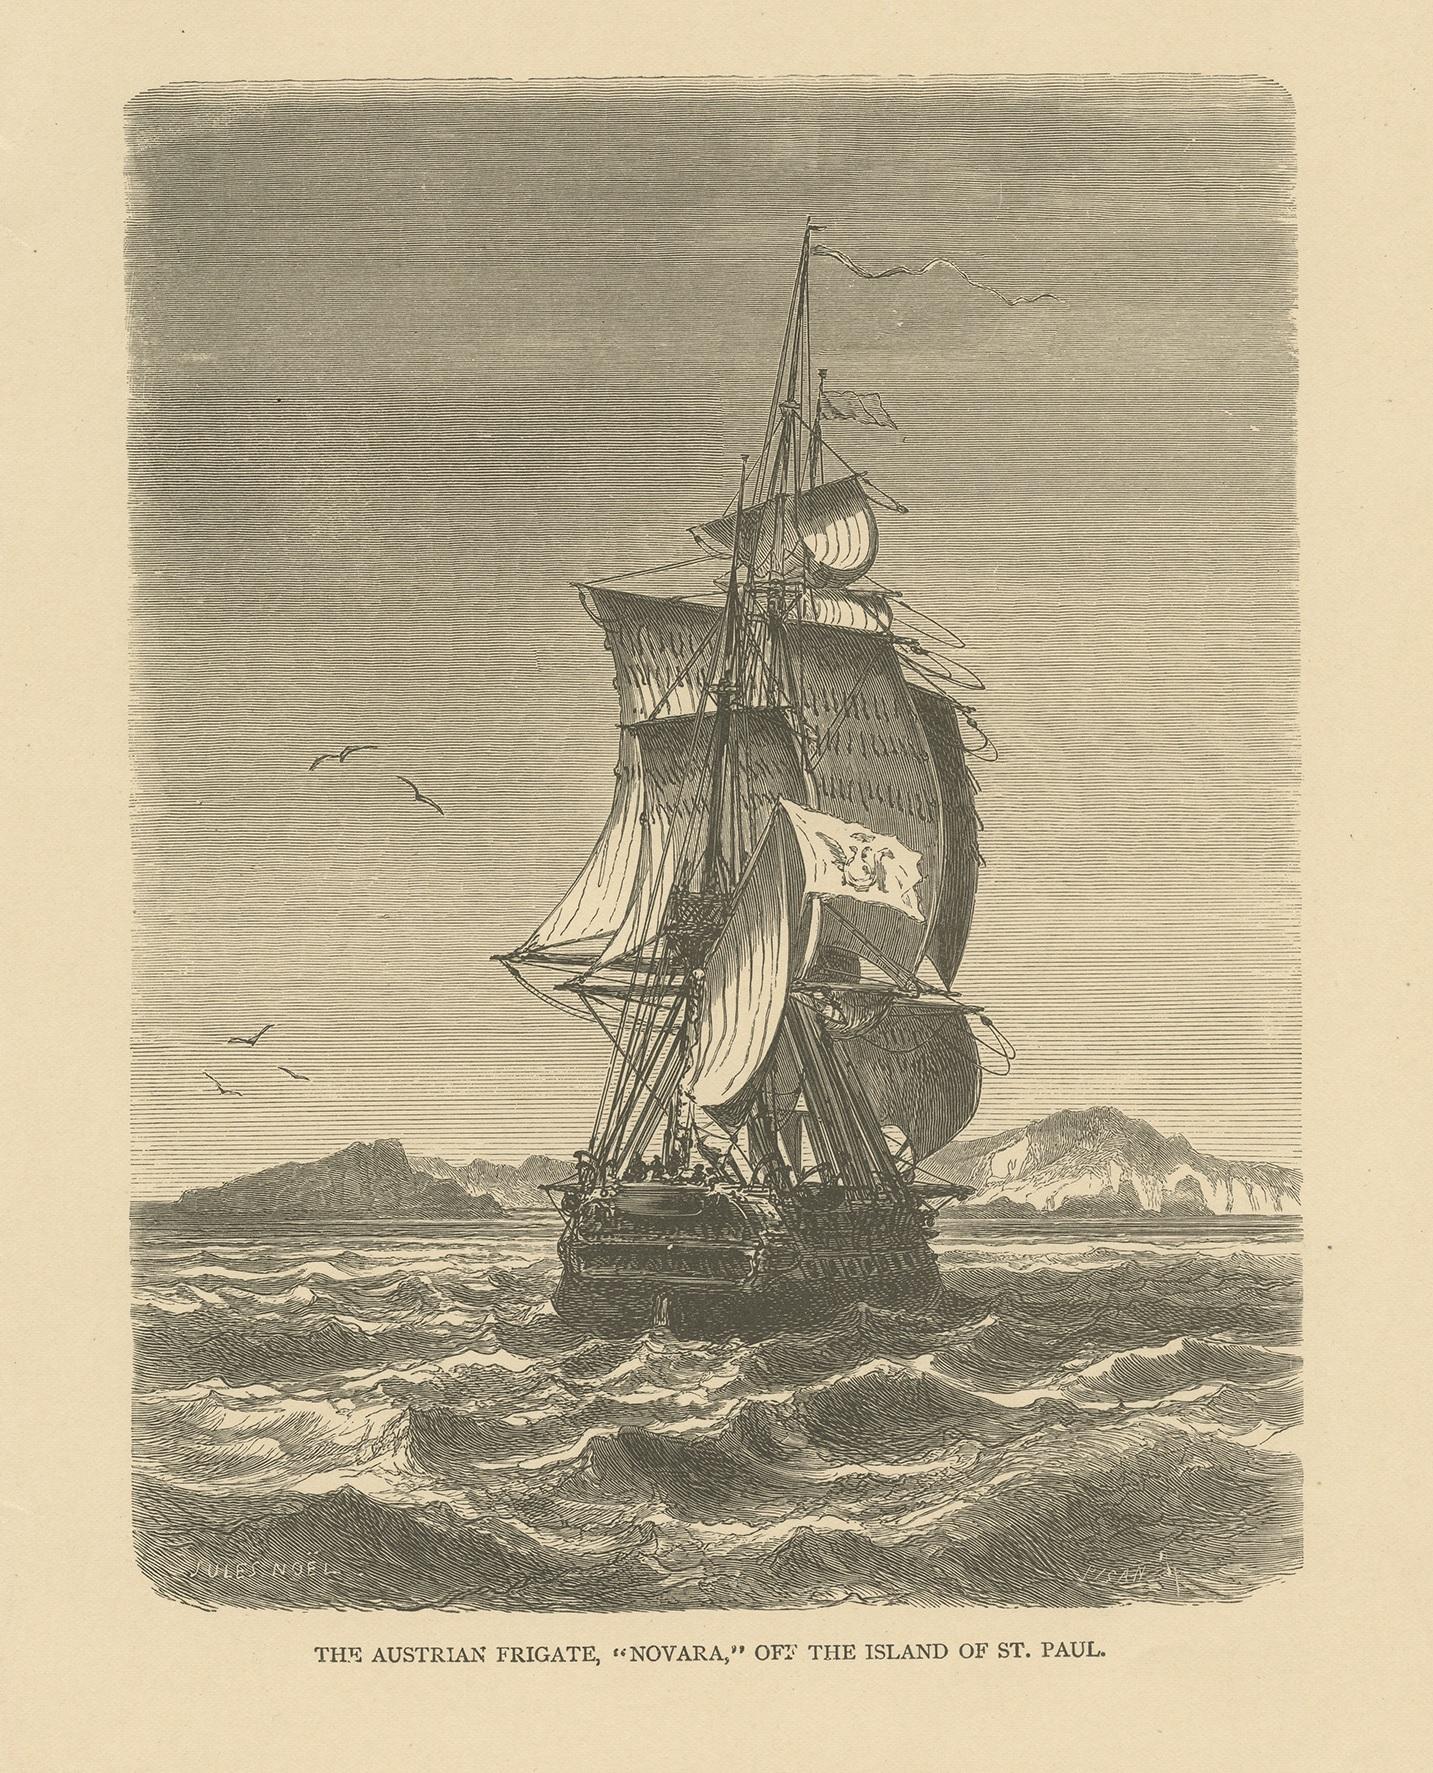 Antique print titled 'The Austrian Frigate 'Novara' off the Island of St. Paul'. Print of the Austrian frigate 'Novara' near the island of Saint Paul. Joined by seven eminent natural scientists, including Karl von Scherzer (1821–1903), the Austrian